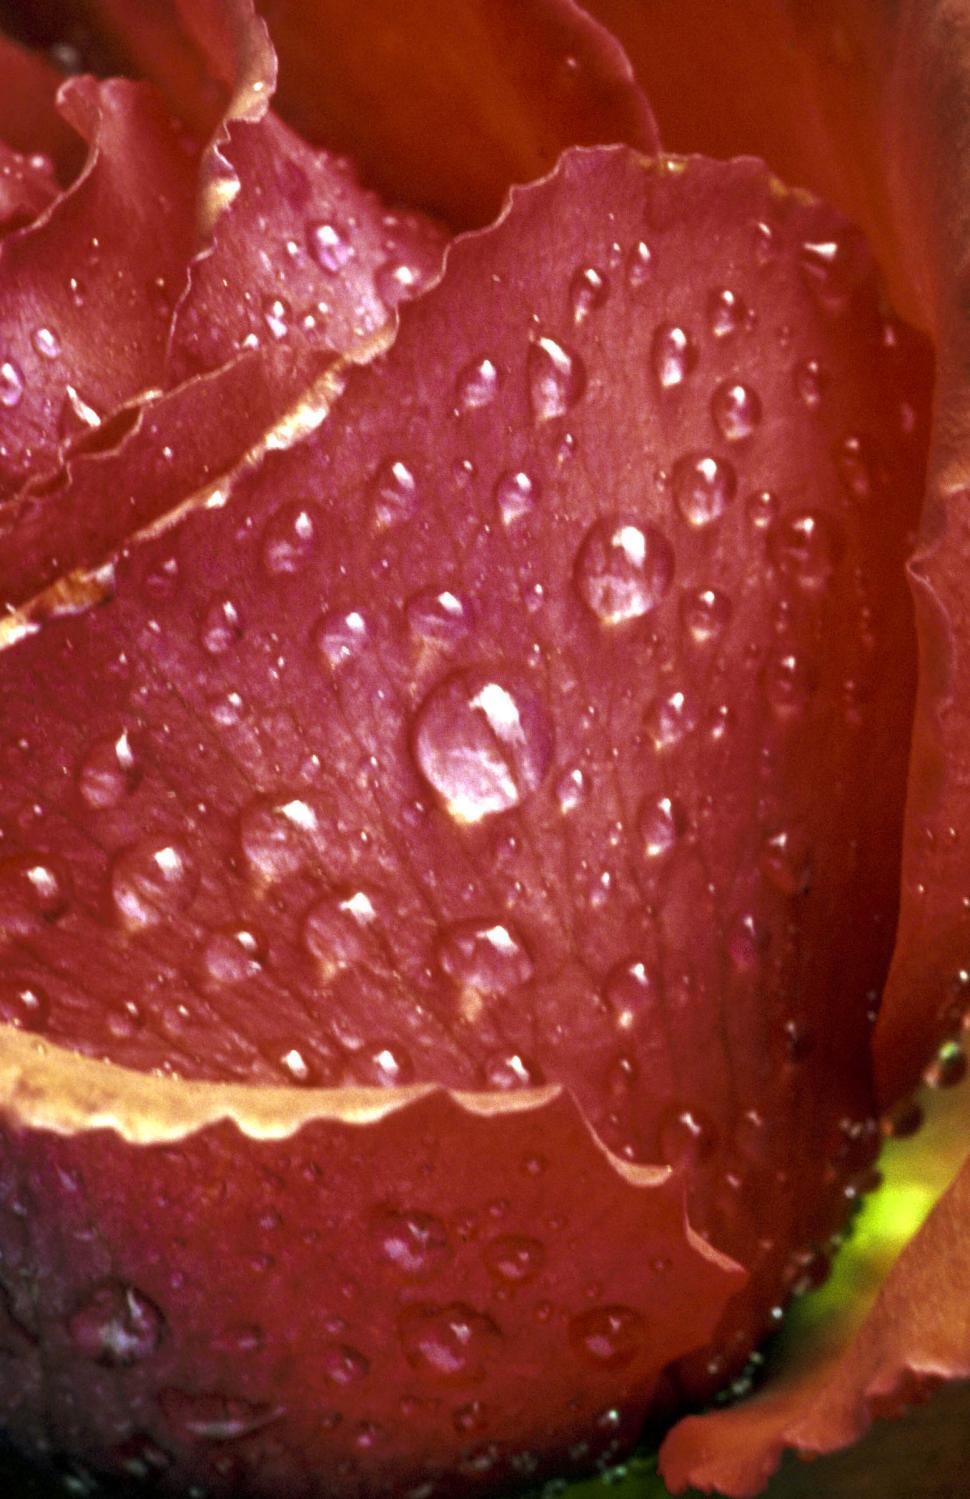 Free Image of Rose and droplets 